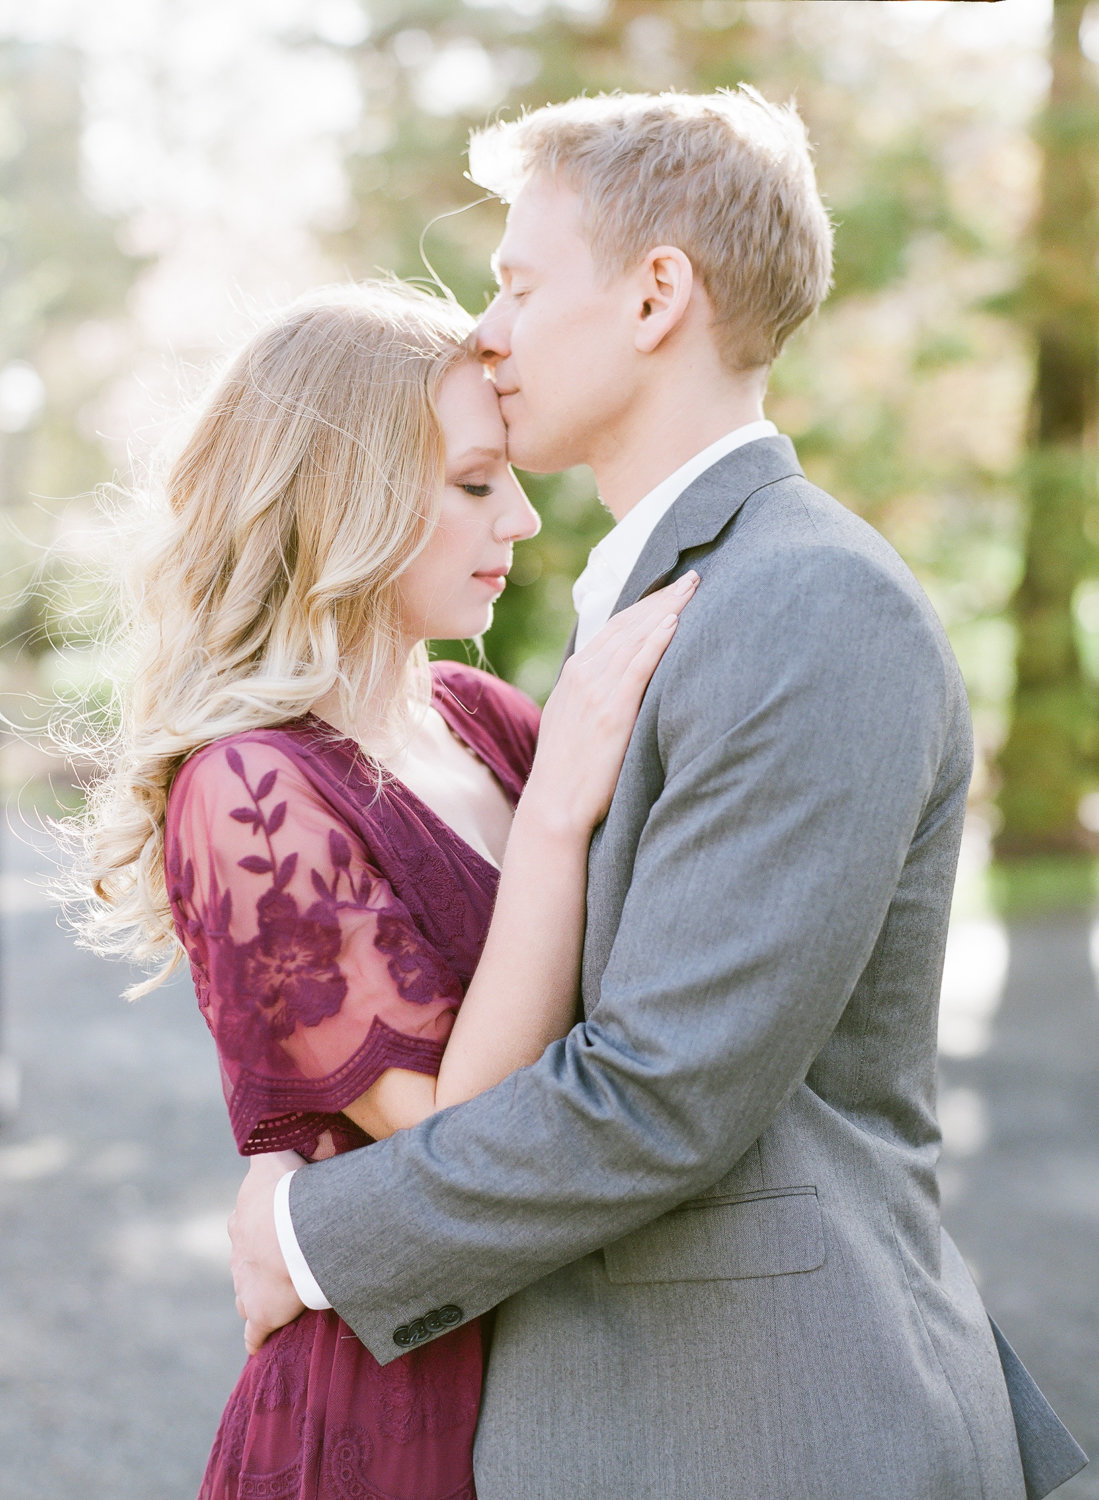 Jacqueline Anne Photography - Amanda and Brent-96